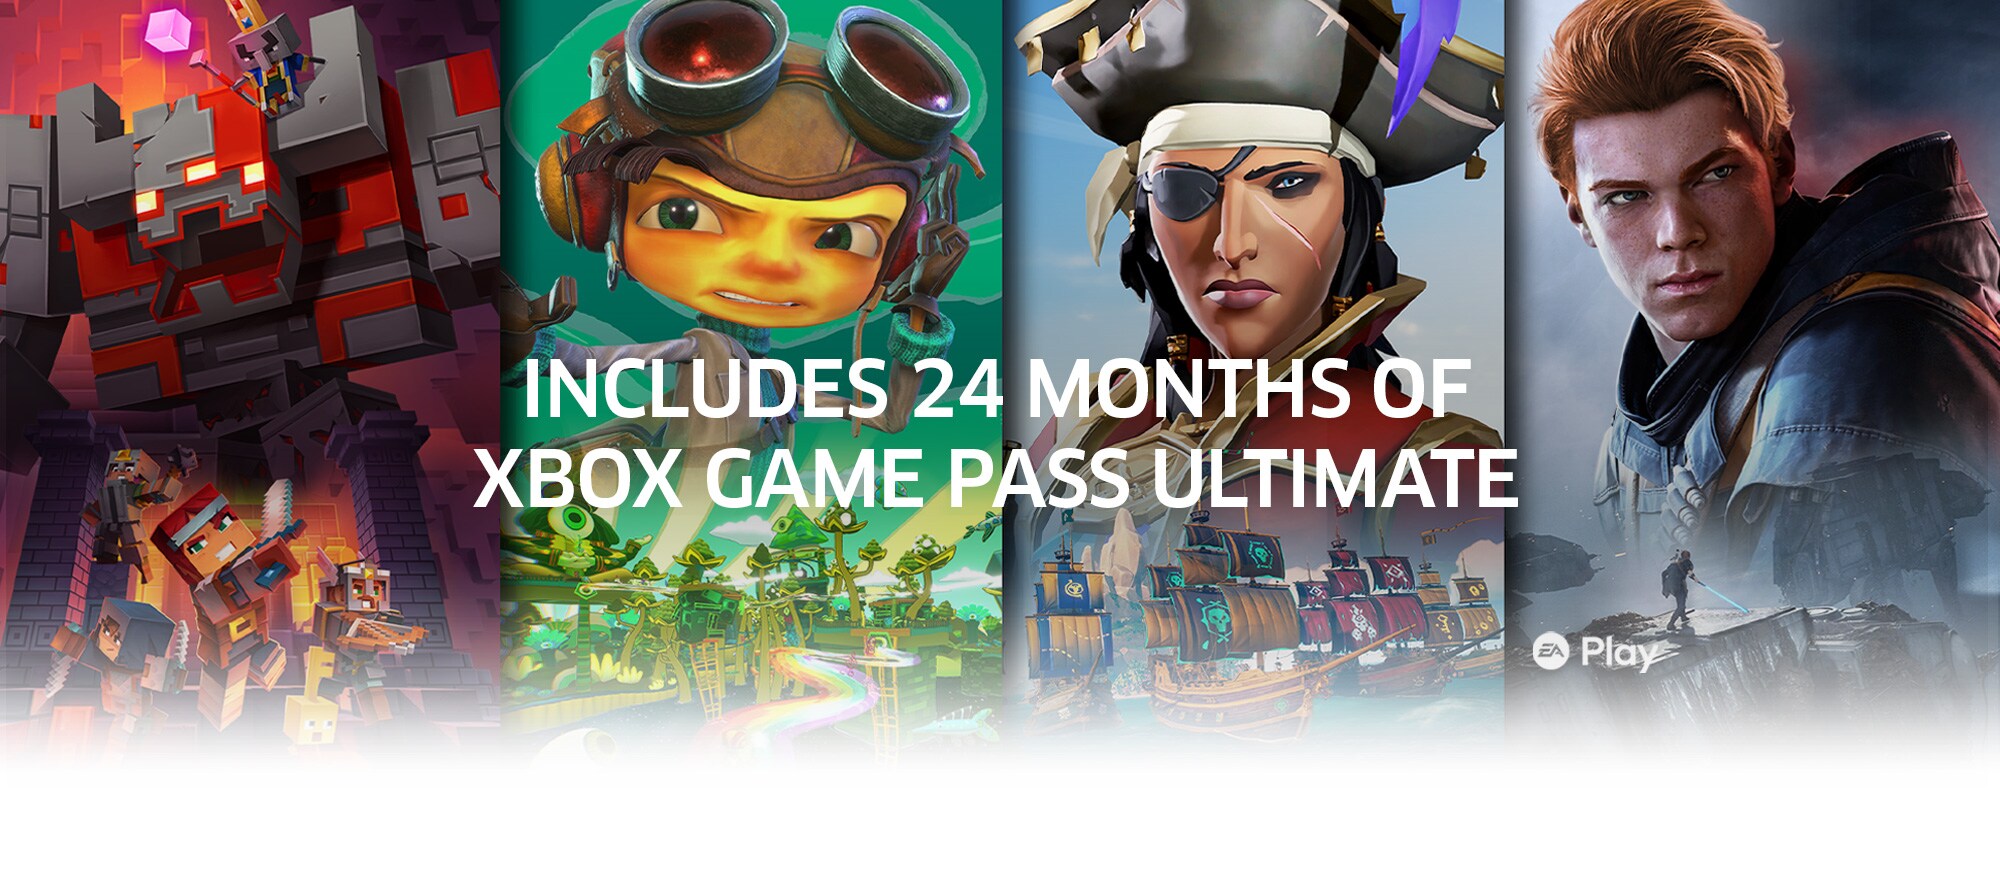 INCLUDES 24 MONTHS OF XBOX GAME PASS ULTIMATE